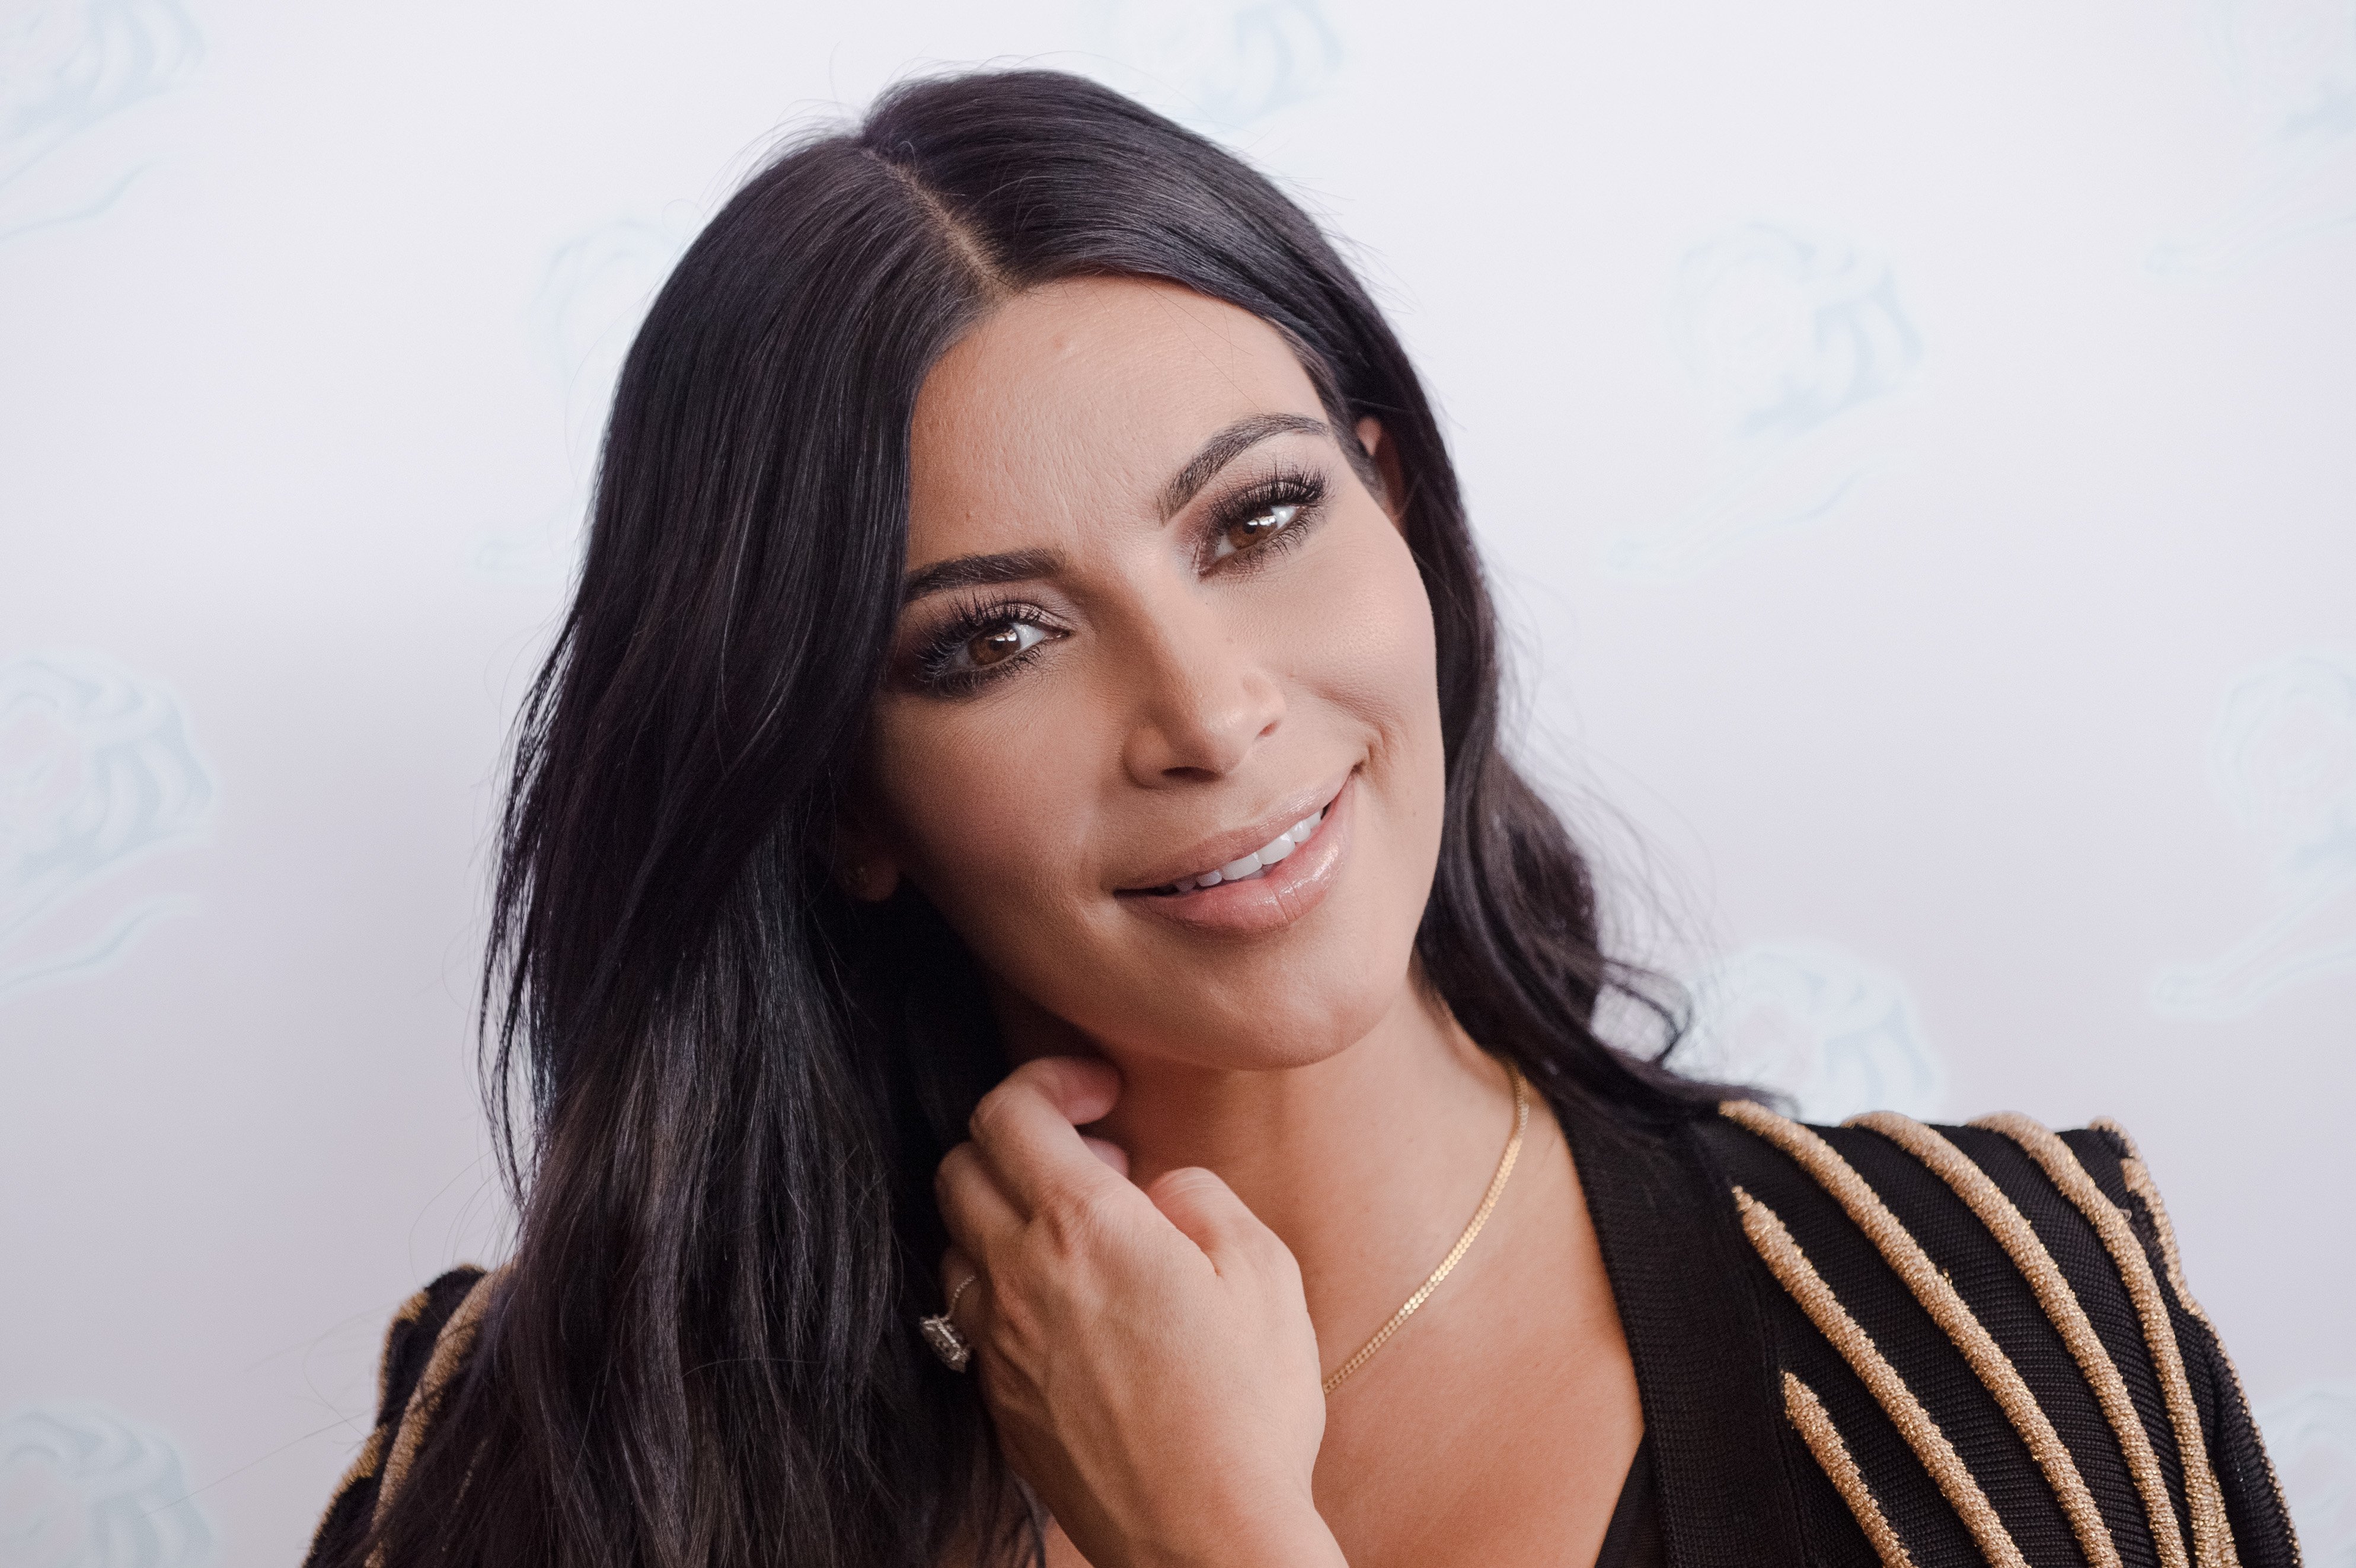 Kim Kardashian attends a 'Sudler' talk during Cannes Lions International Festival of Creativity on June 24, 2015, in Cannes, France | Photo: Getty Images